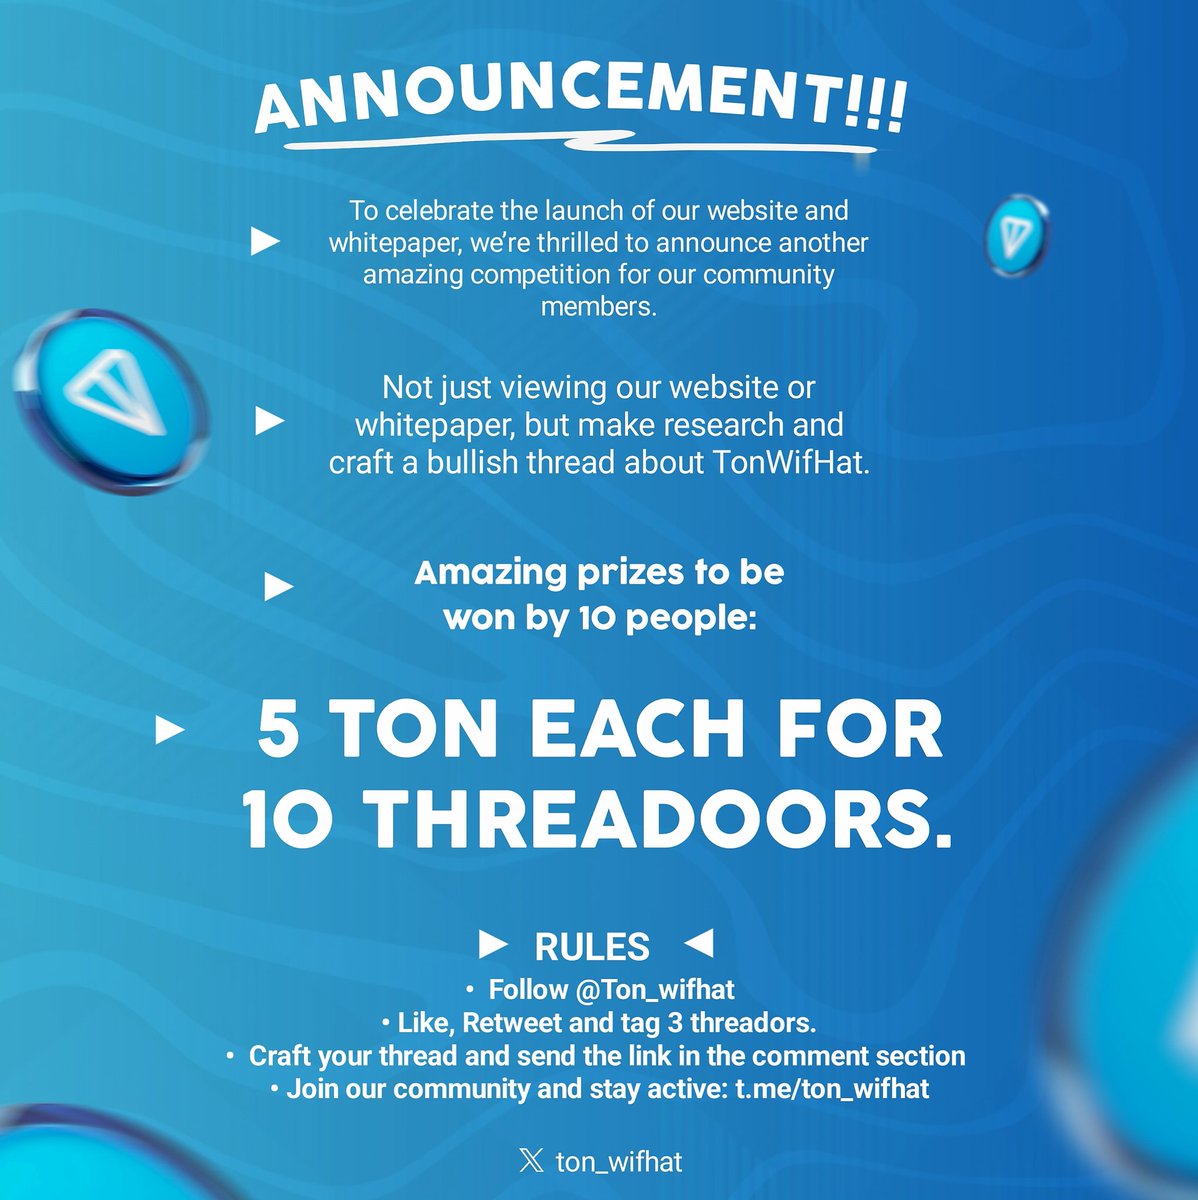 To celebrate the launch of our website and whitepaper, we’re thrilled to announce another amazing 🤩 competition for our community members. Not just viewing our website or whitepaper, but make research and craft a bullish thread about TonWifHat. Amazing prizes to be won by 10…